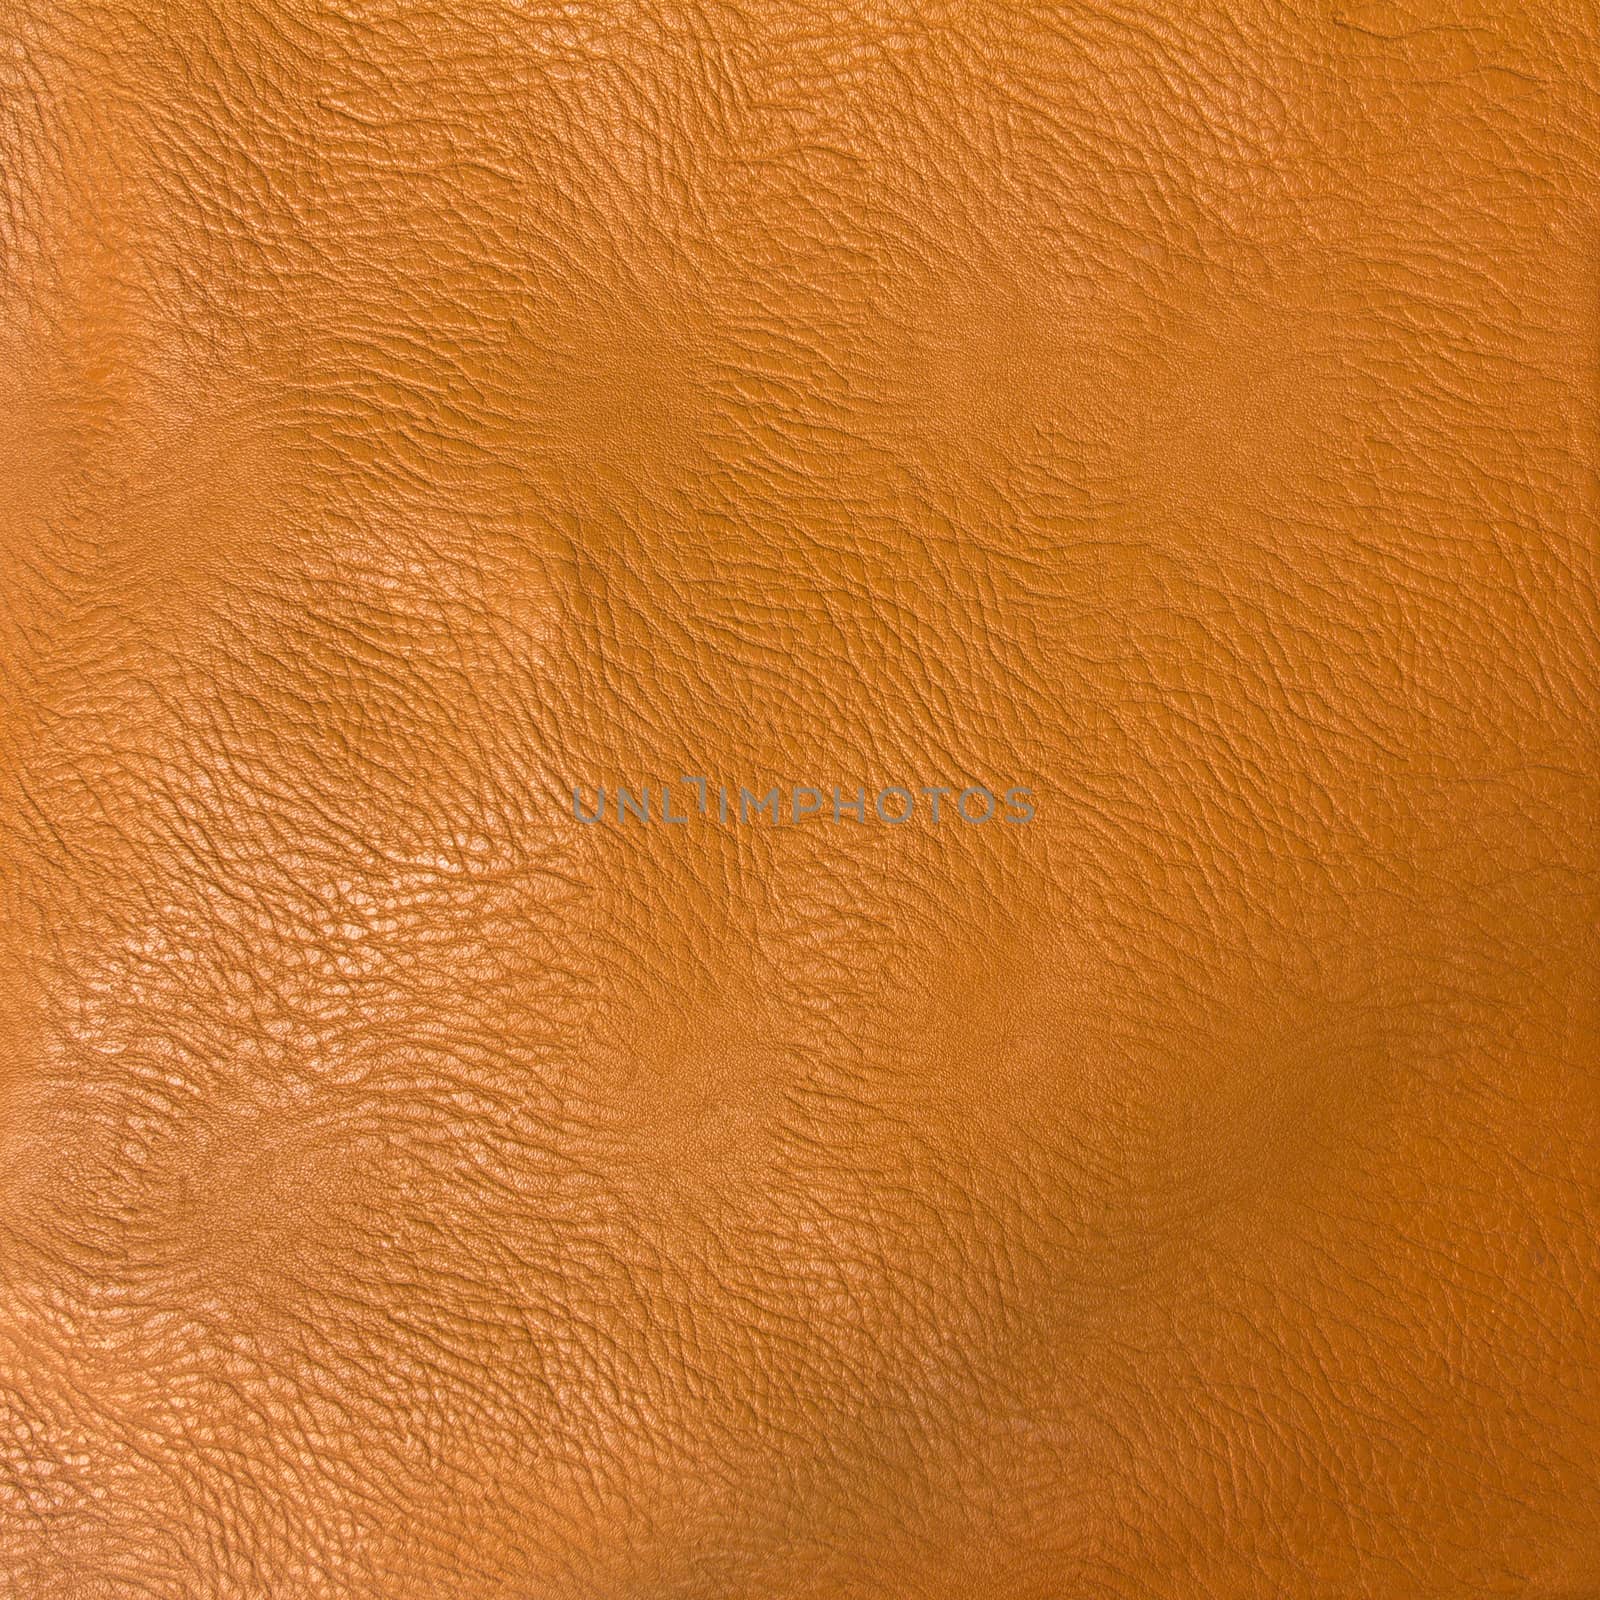 Texture of black leather for background  by wyoosumran